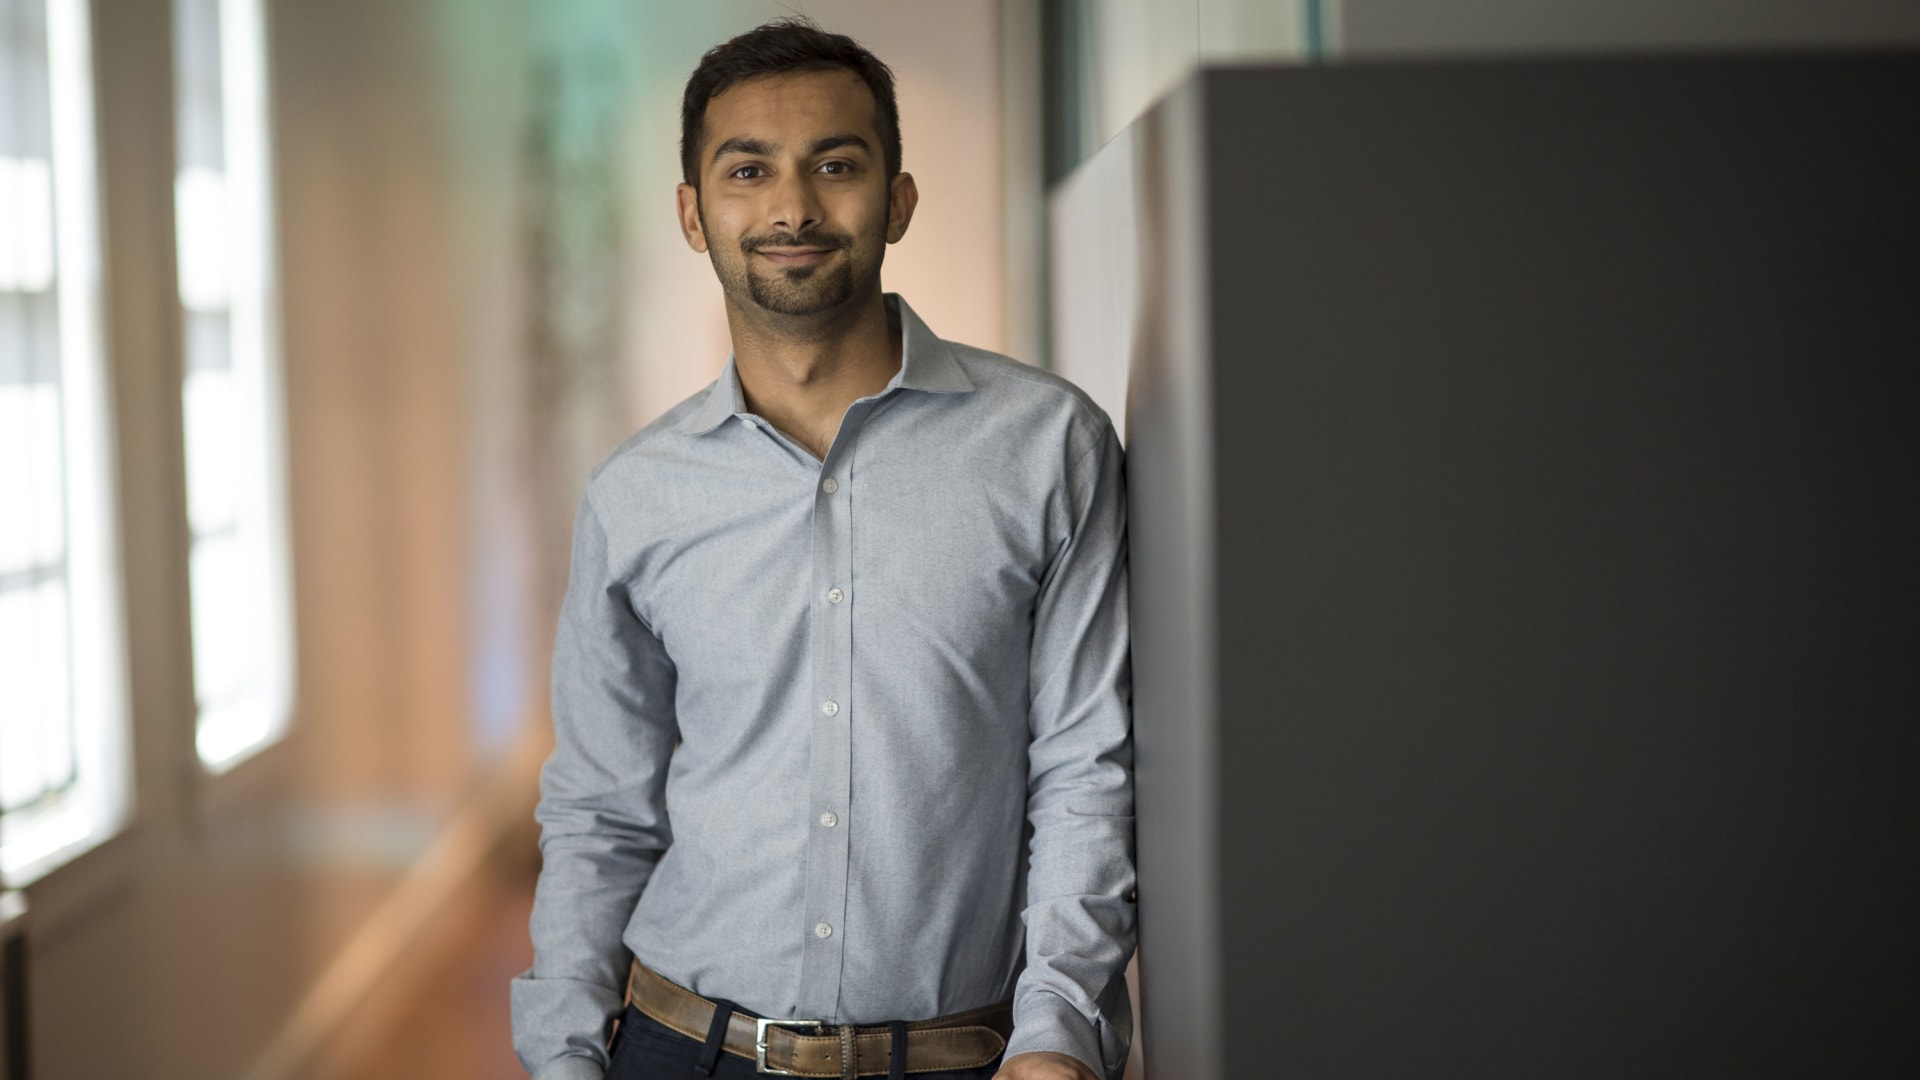 Apoorva Mehta, the Indian Canadian founder of Instacart.